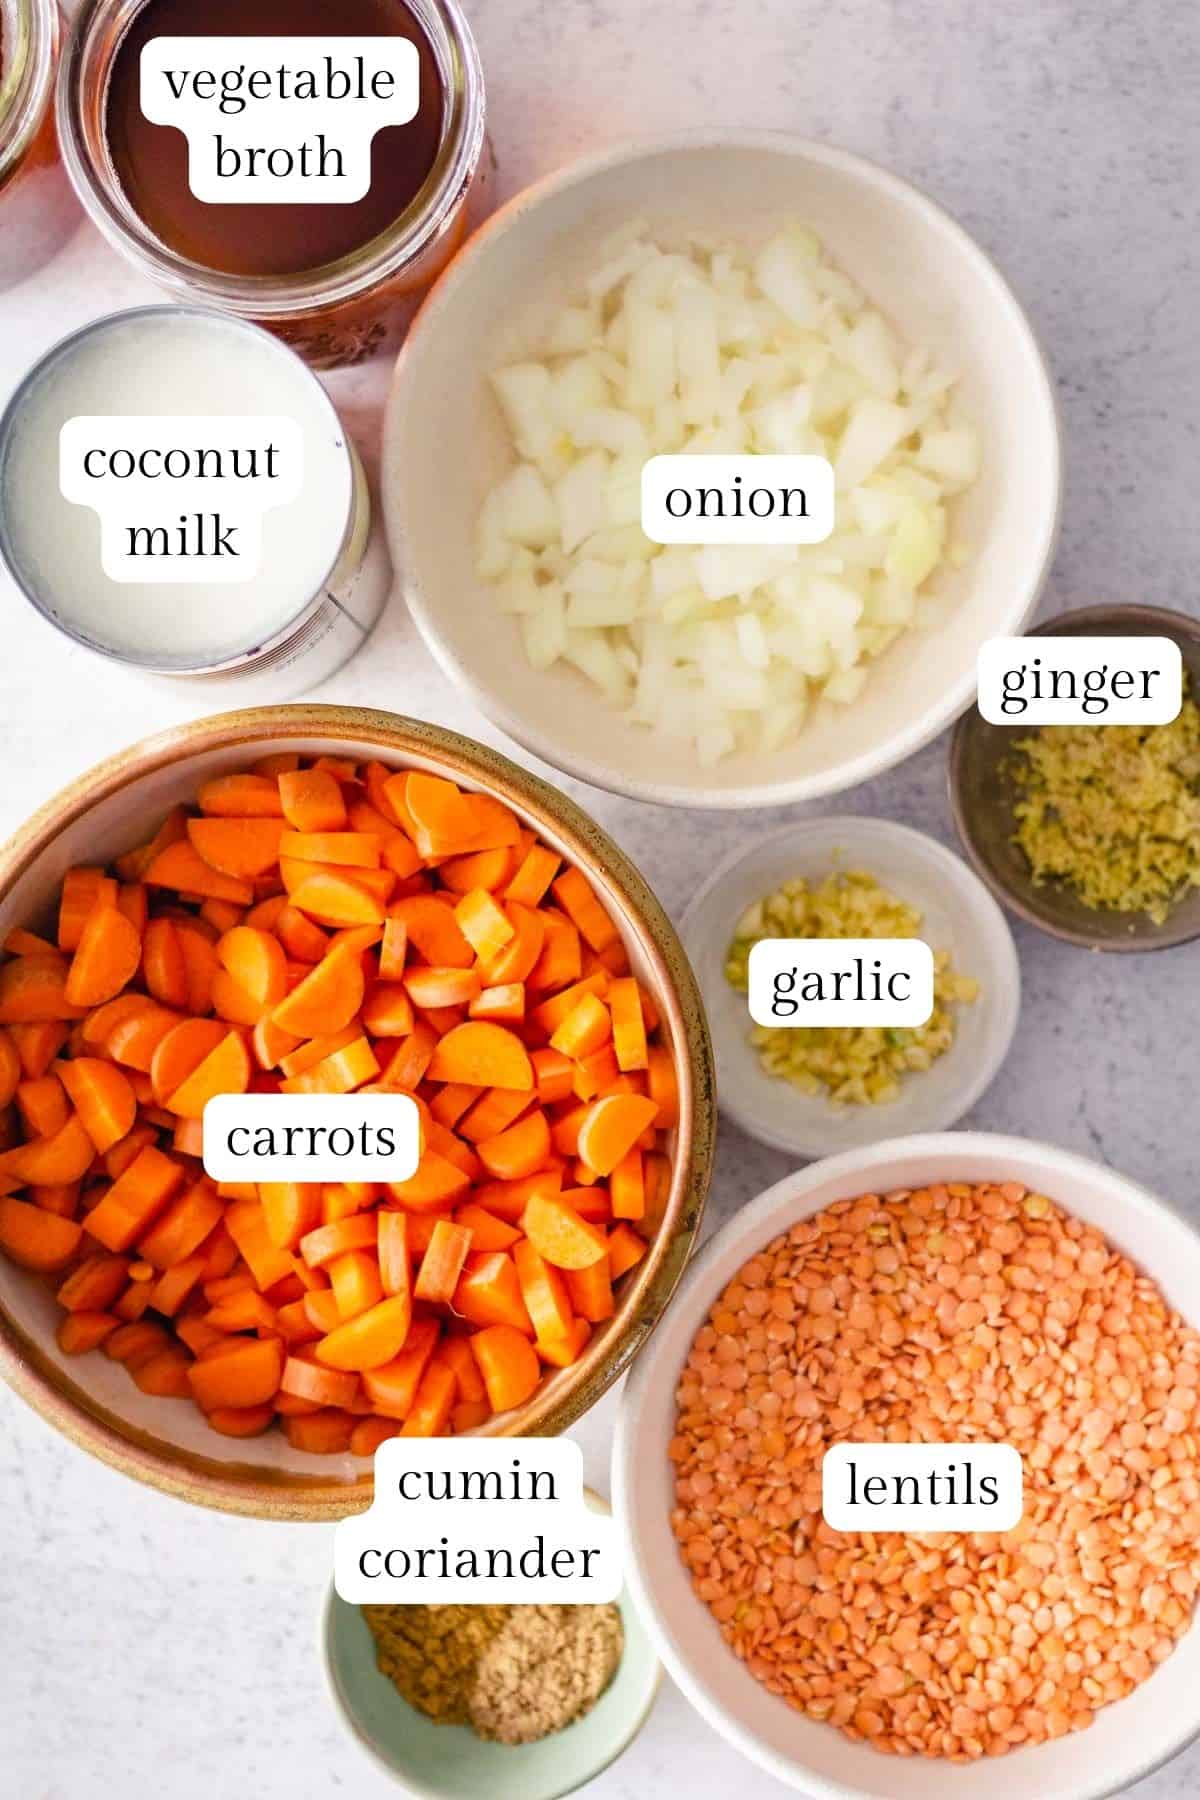 Labeled ingredients for carrot lentil soup, including carrots, lentils, vegetable broth, coconut milk, onion, and spices.